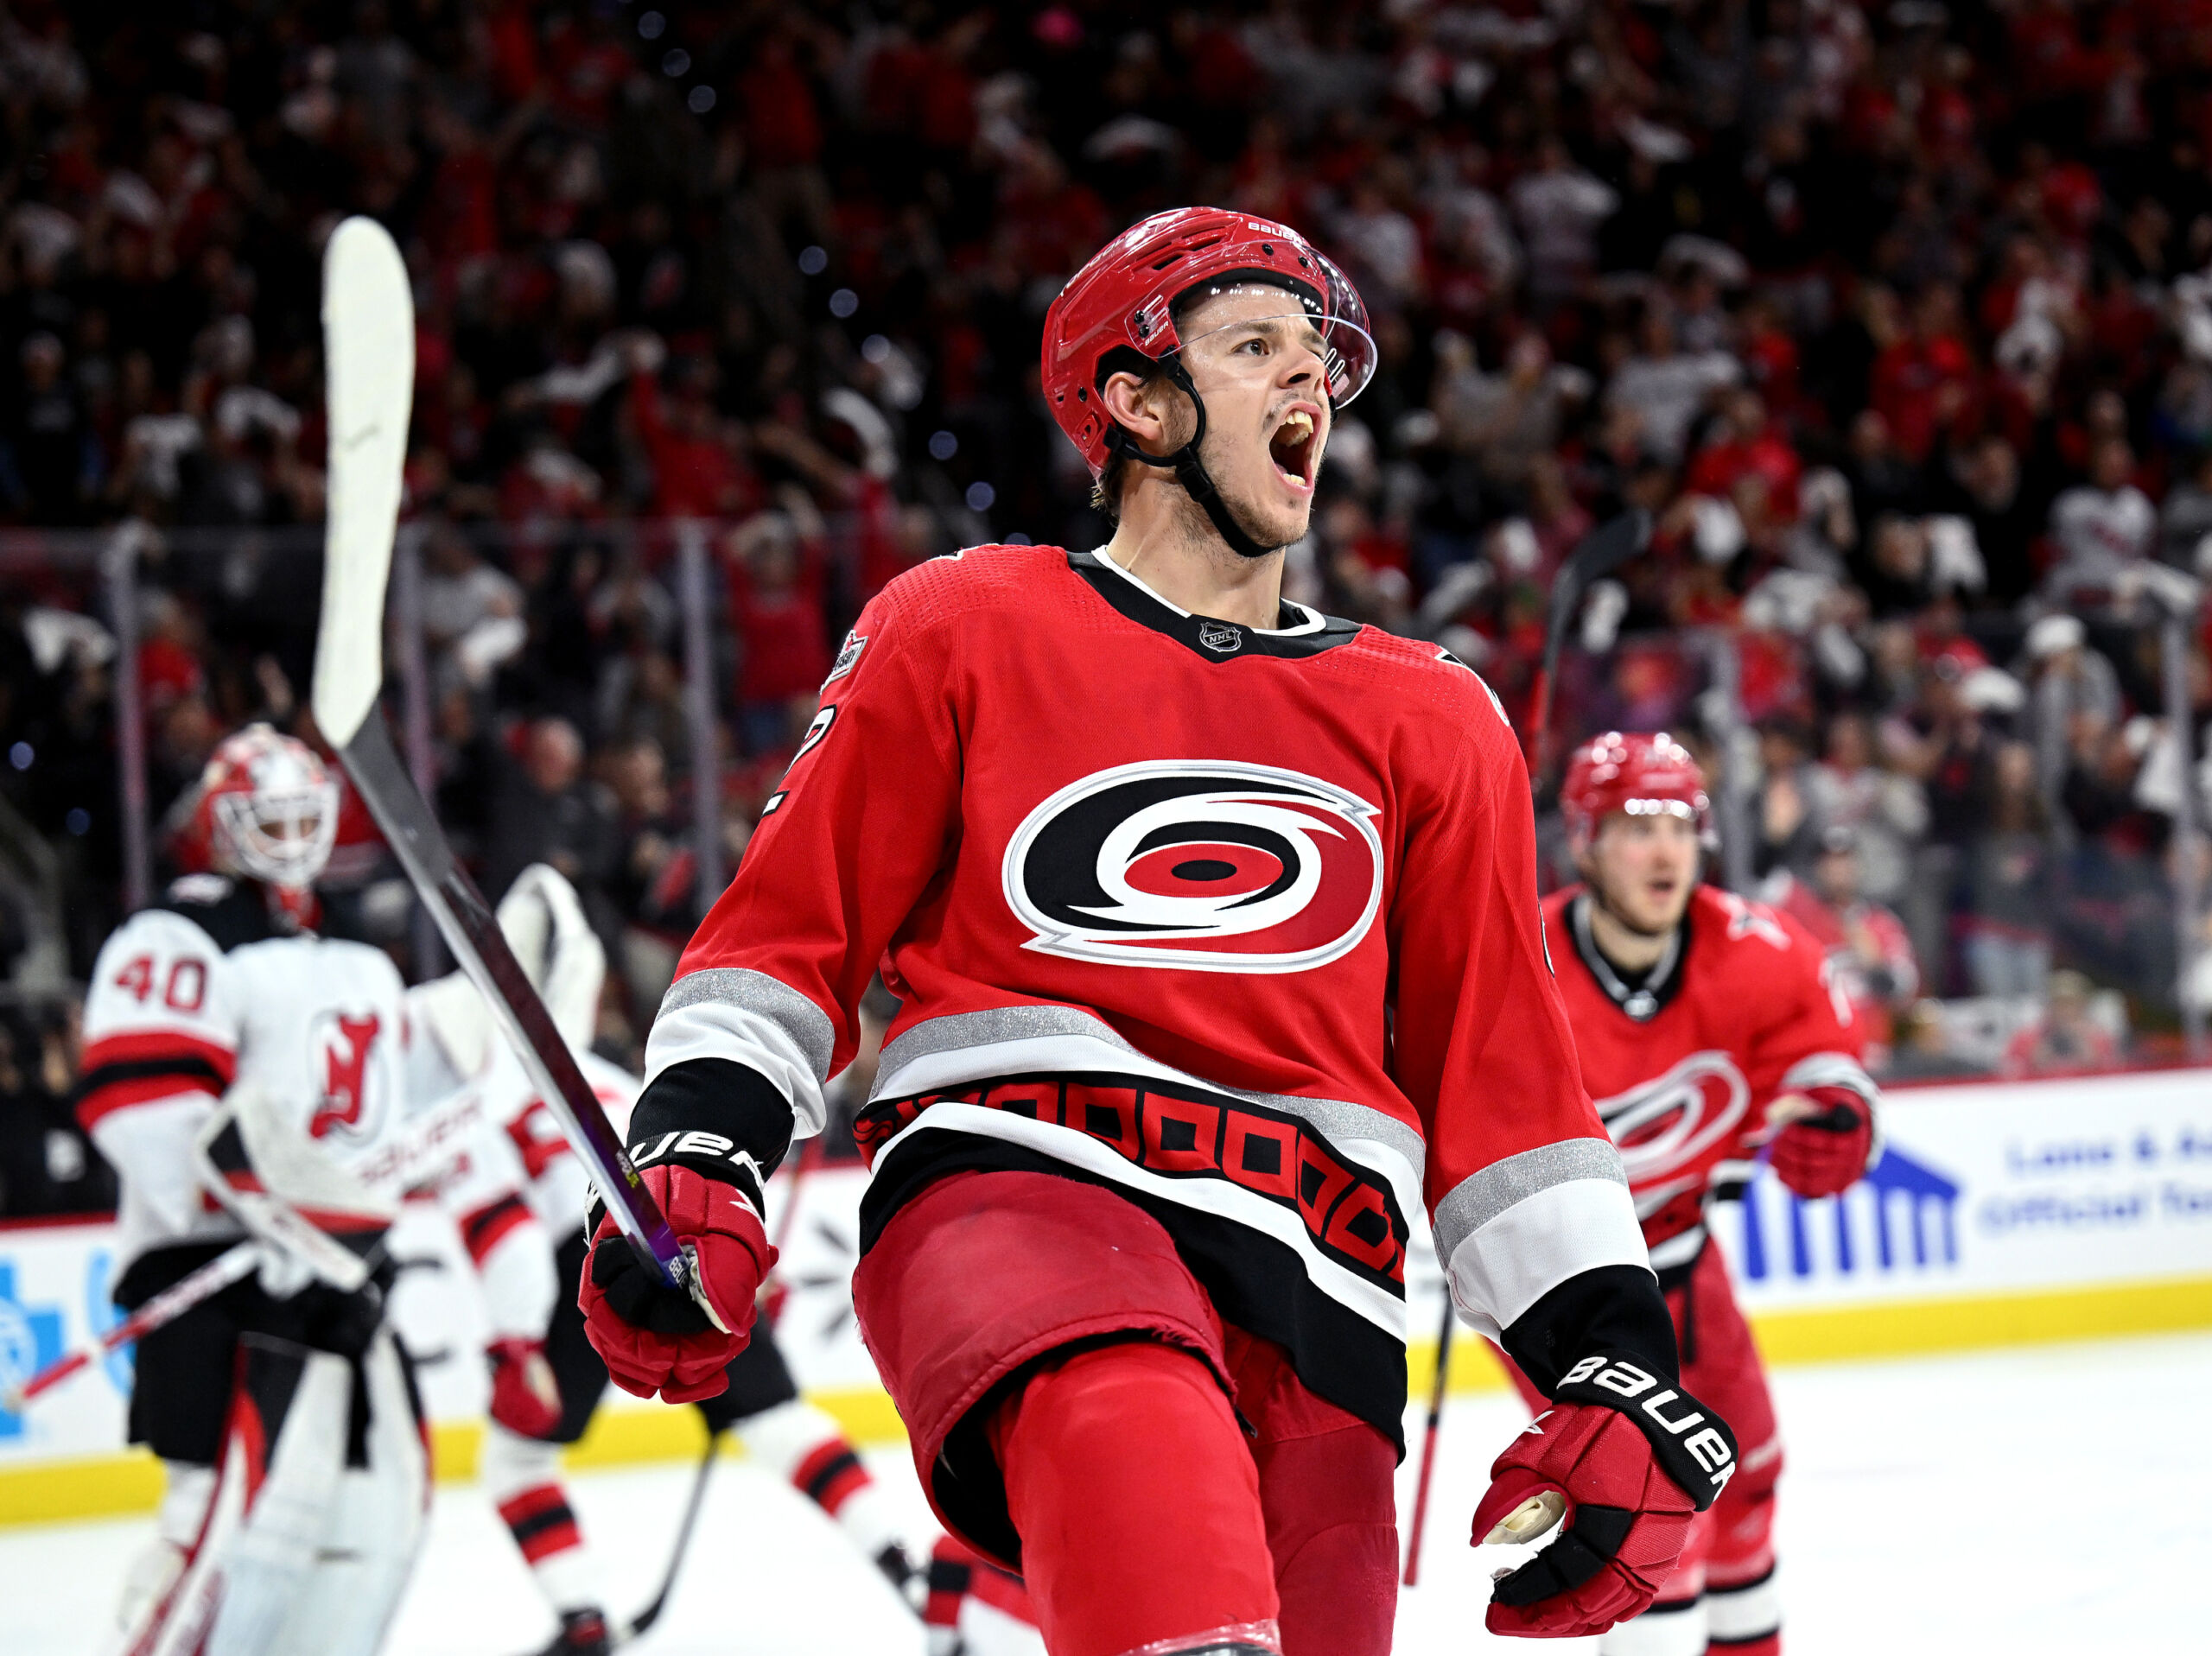 Carolina Hurricanes beat the New Jersey Devils, move into 1st in